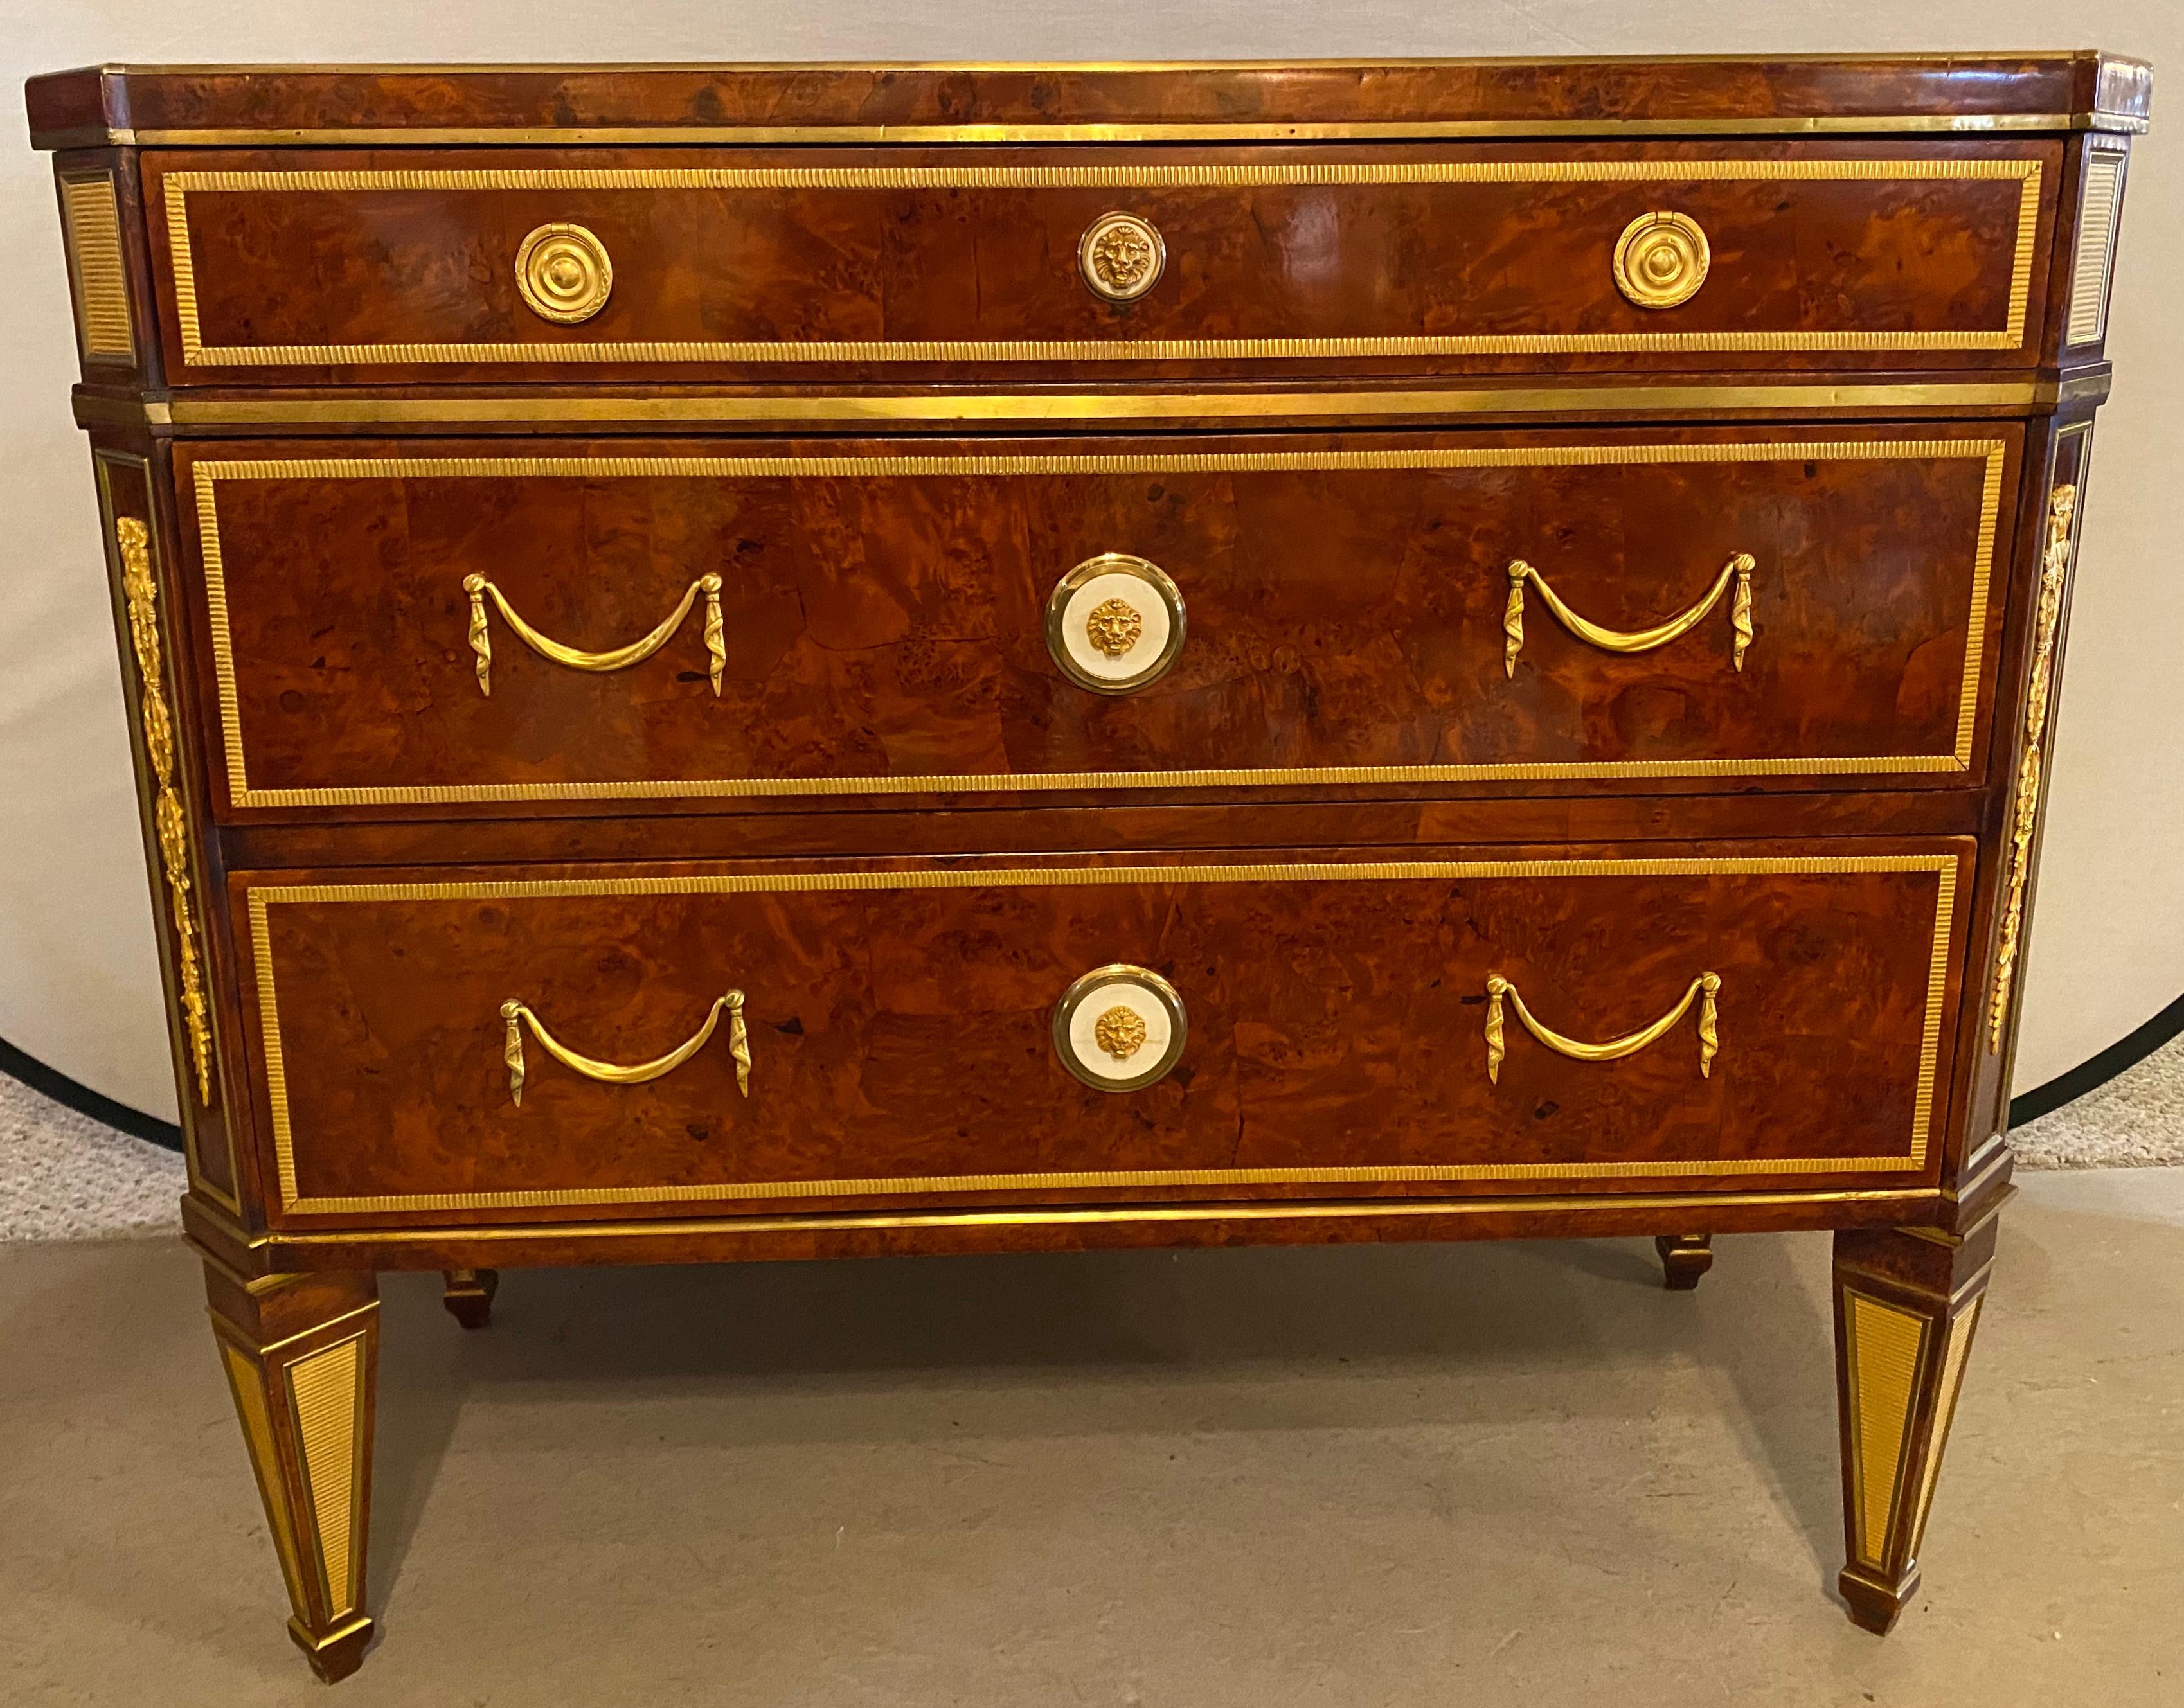 Neoclassical, Rare Commodes, Tortoise Shell Veneer, Bronze, Baltic States, 1880s In Good Condition For Sale In Stamford, CT